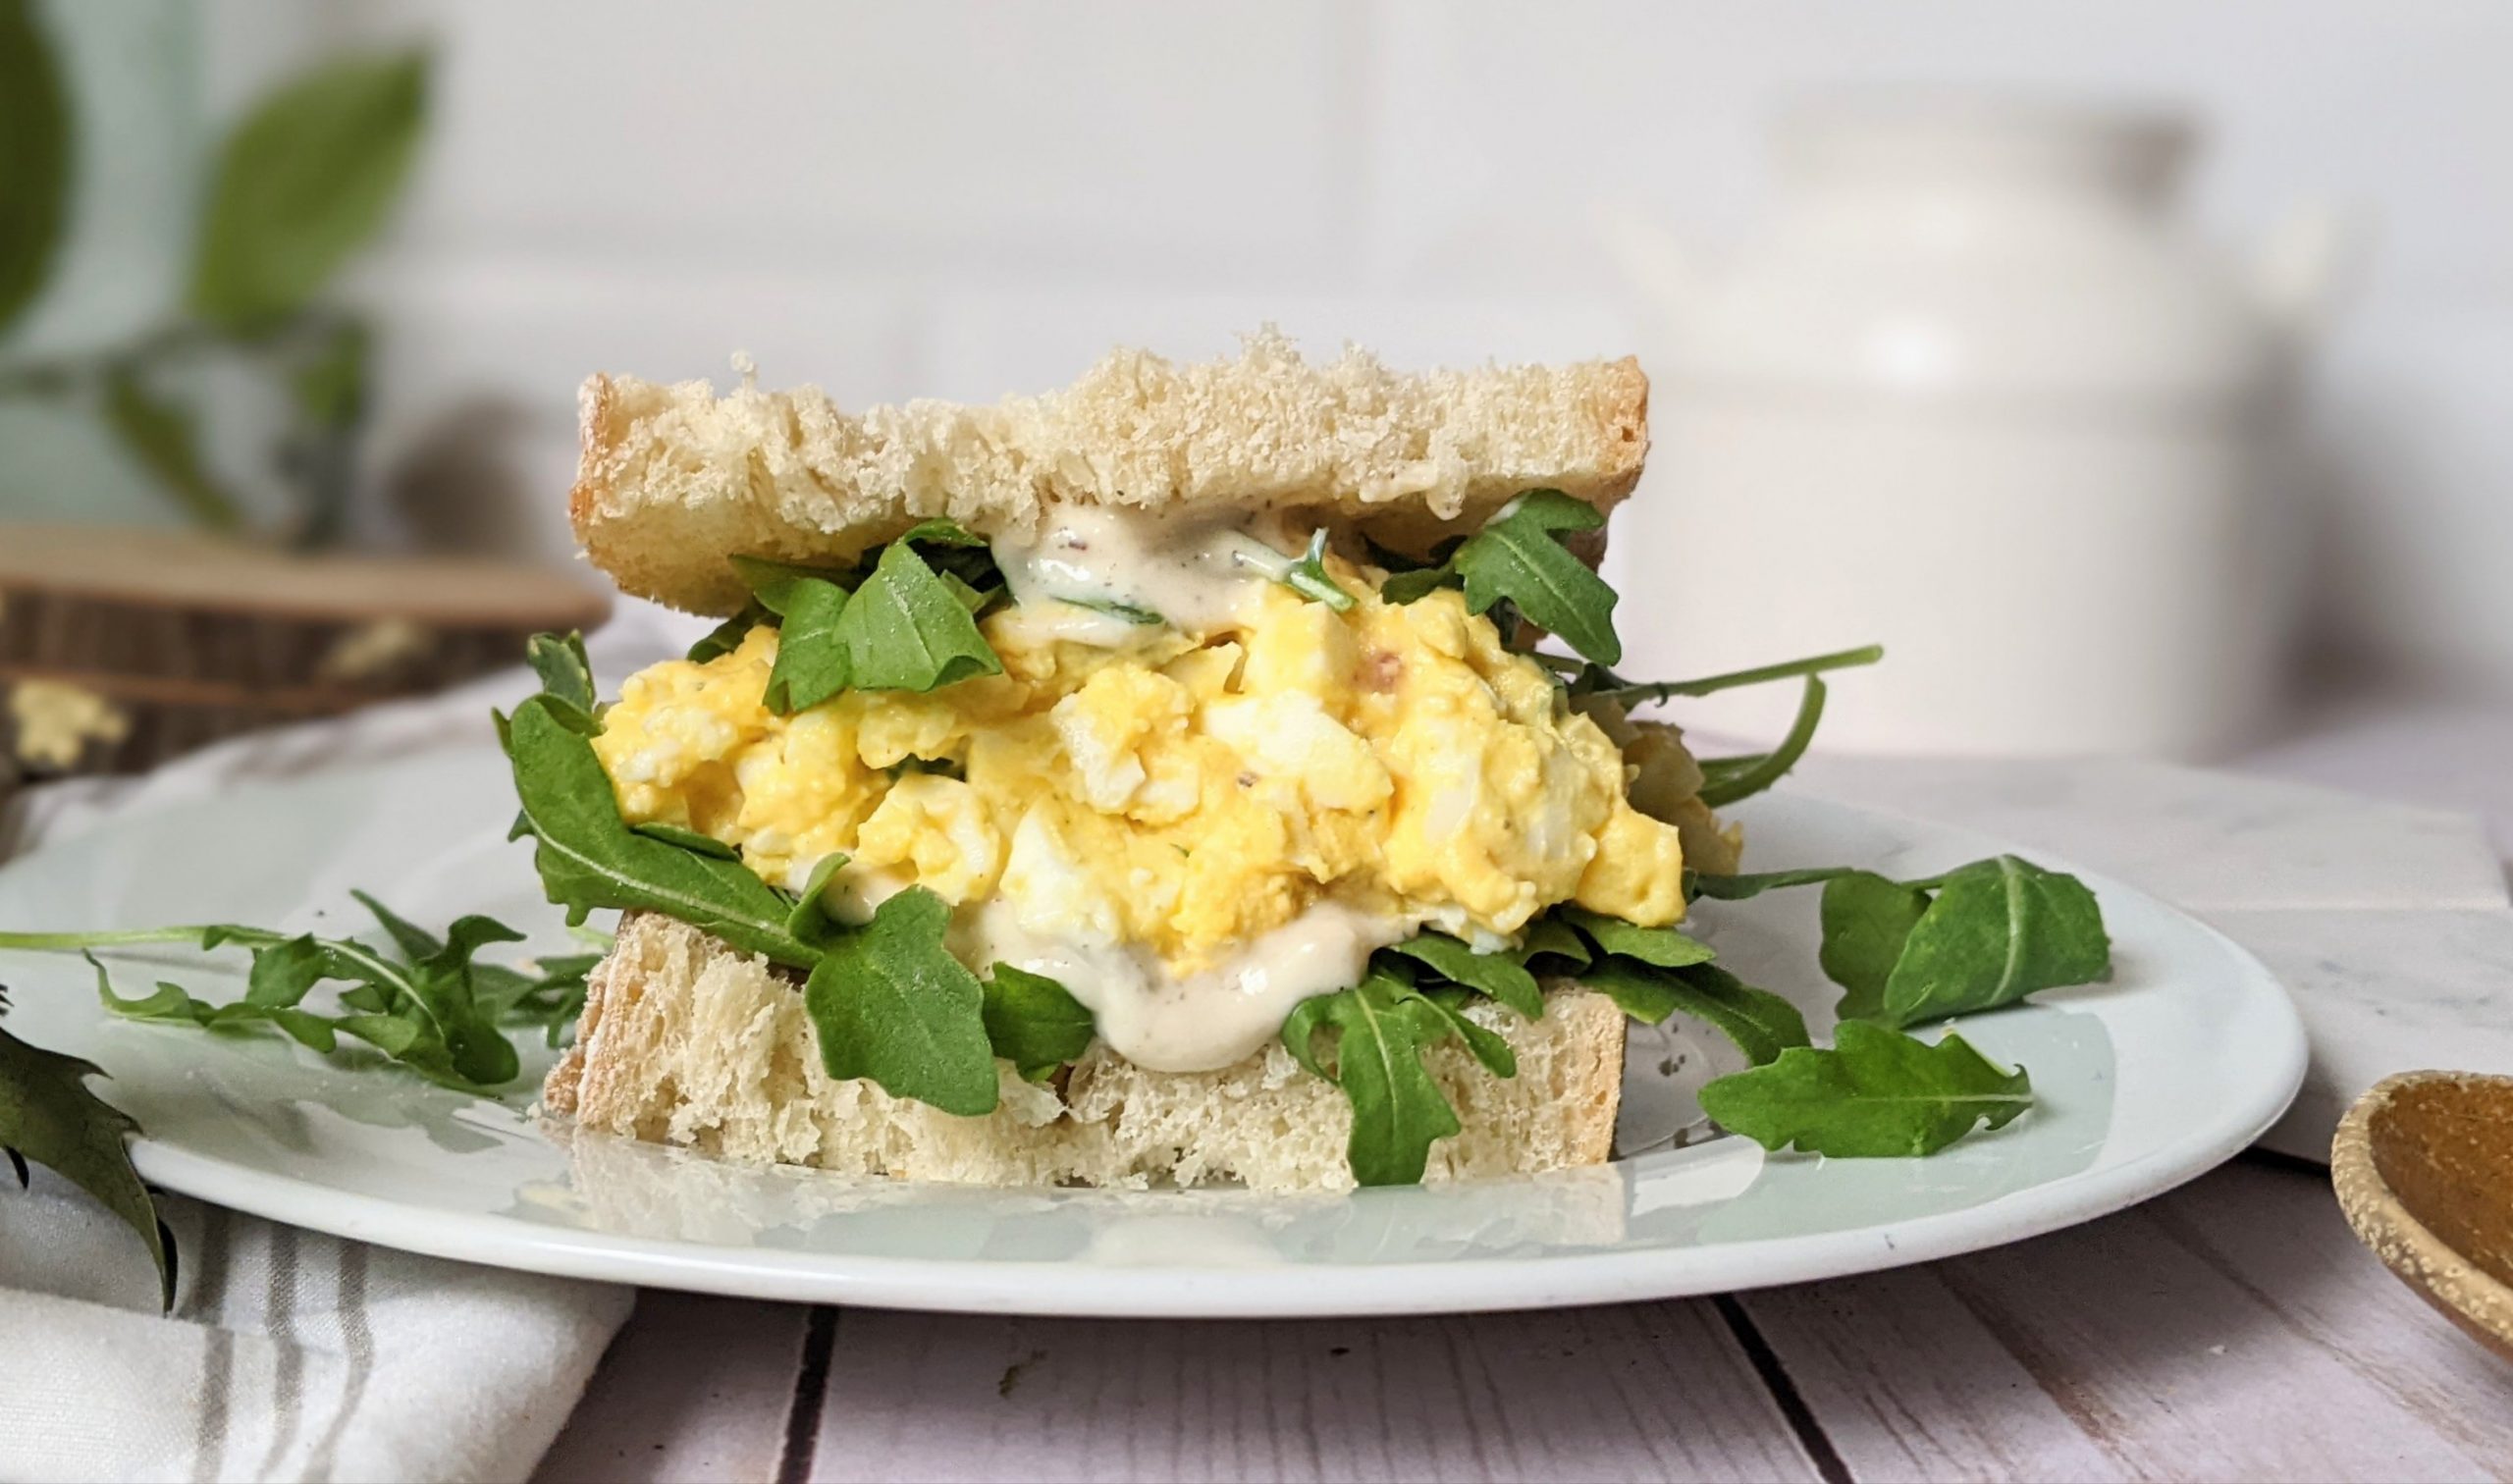 ranch egg salad sandwich recipe with arugula lettuce no mayo egg salad sandwiches without mayonnaise use creamy ranch dressing gluten free dairy free